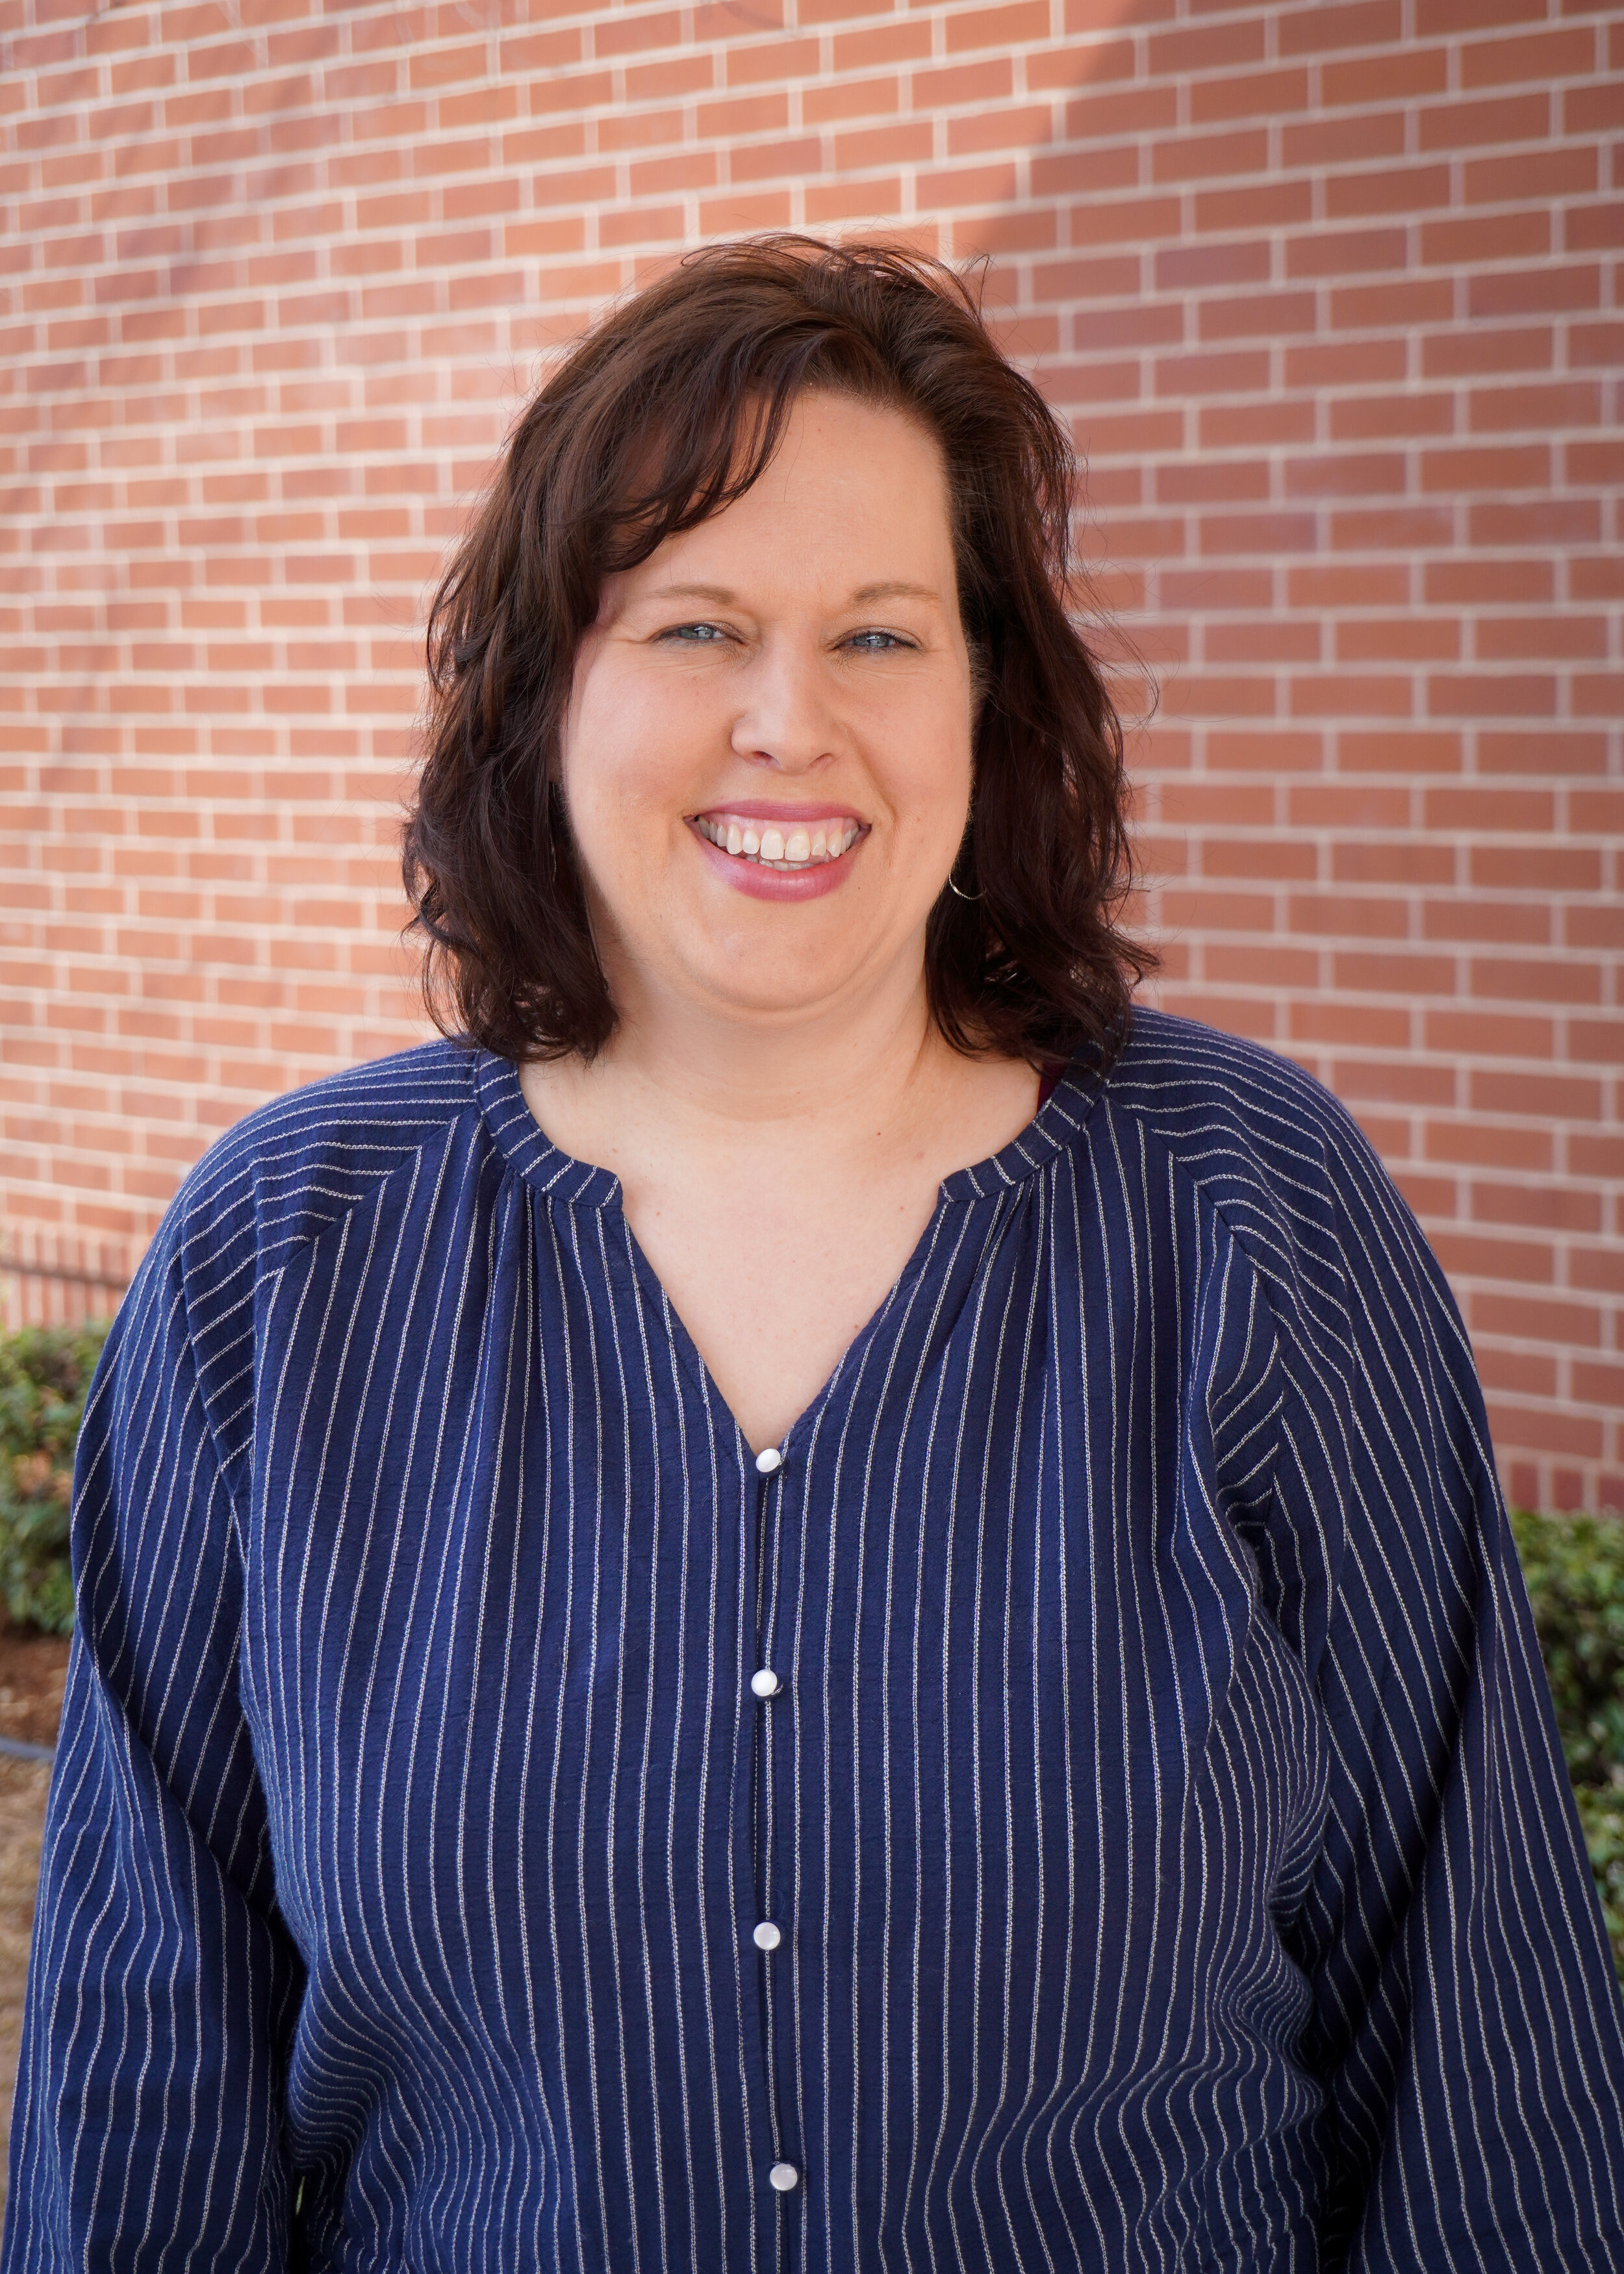 Angie Laubach, Children's Ministry Director